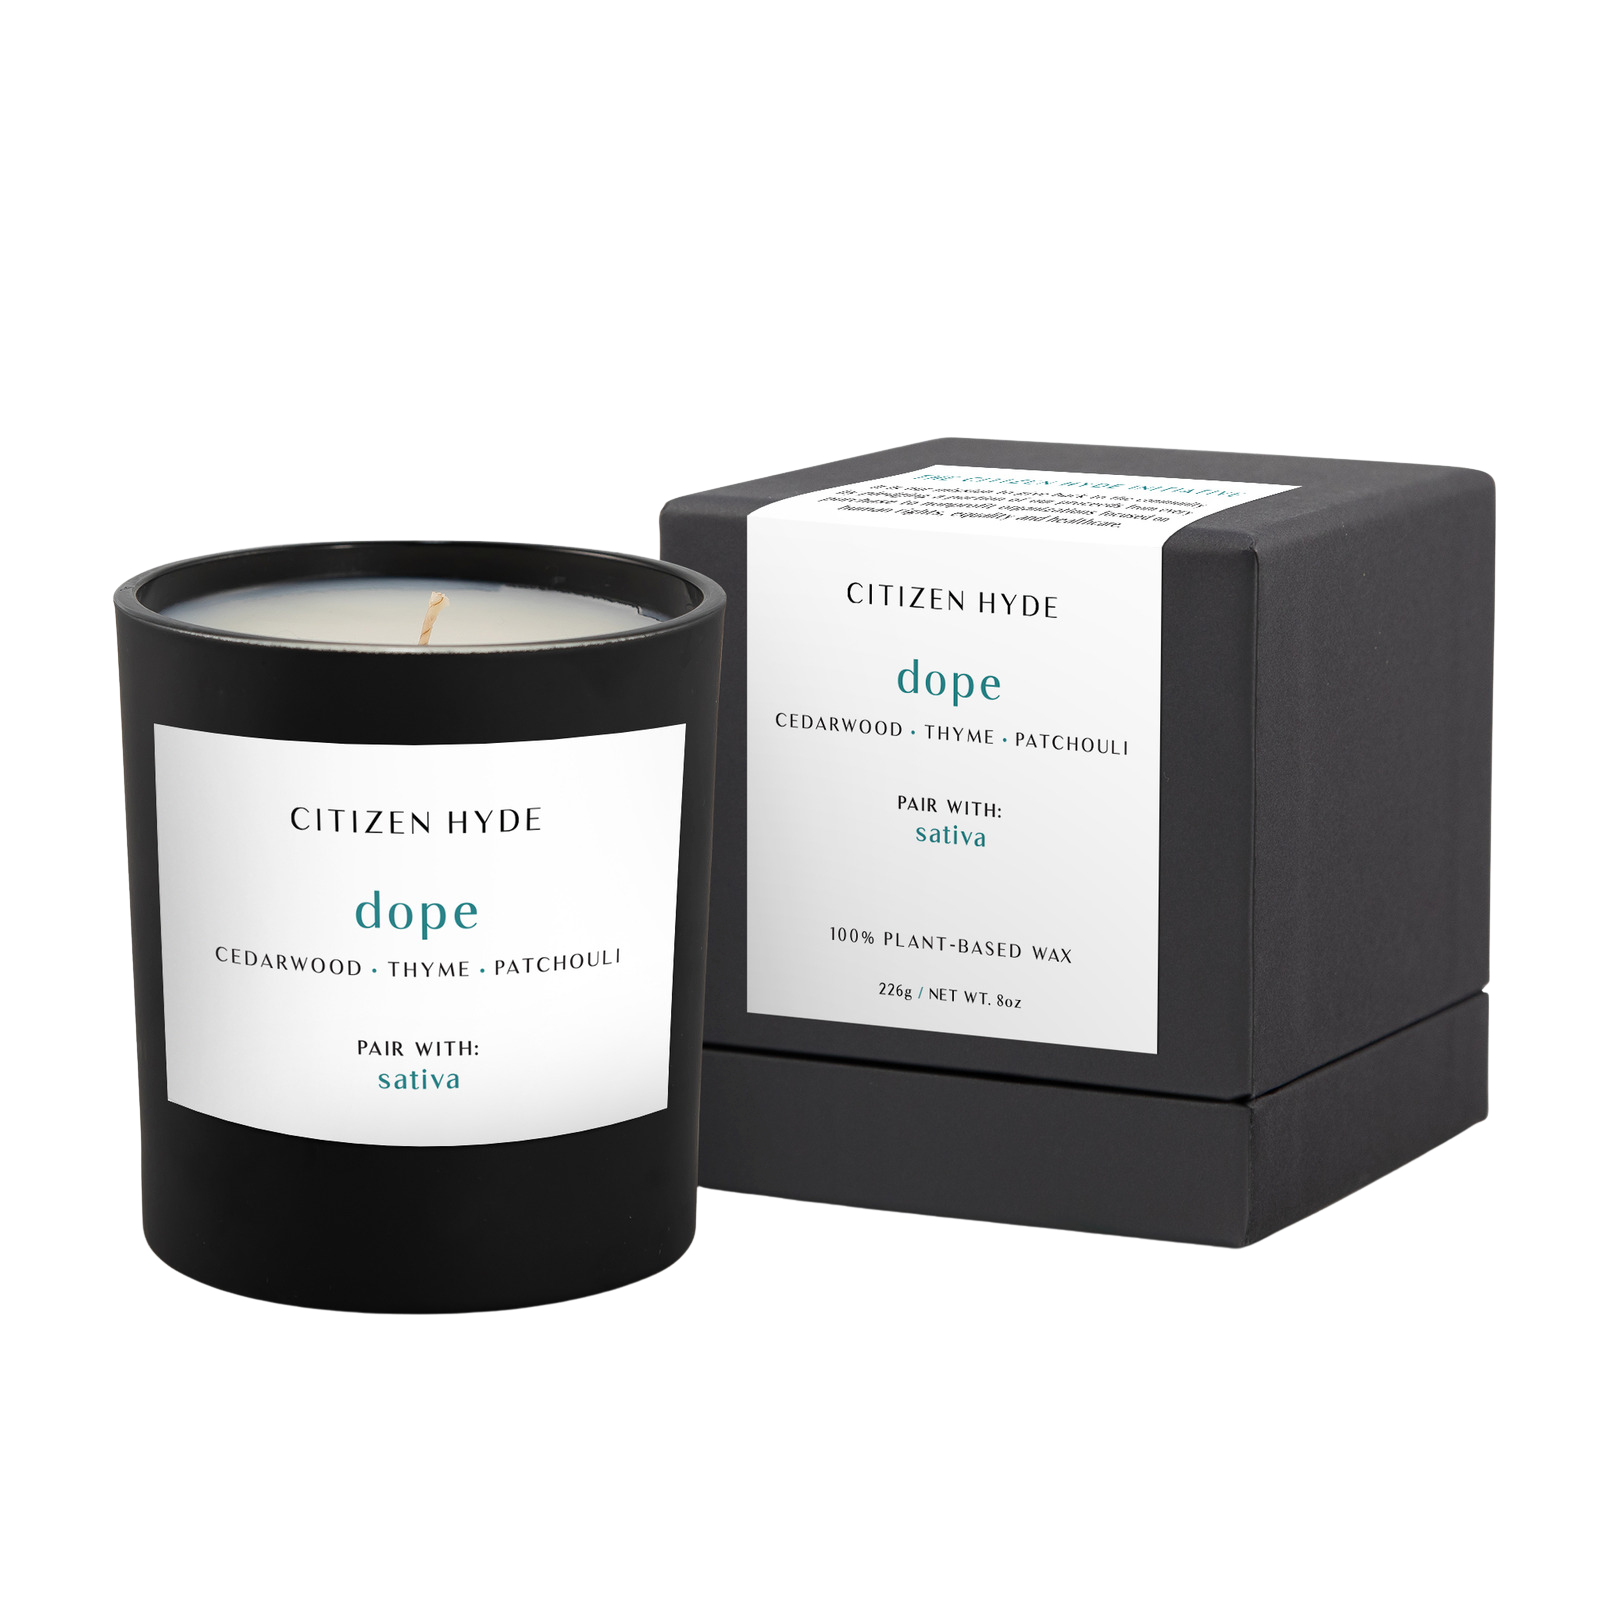 Dope Citizen Hyde Candle, Pair with Sativa